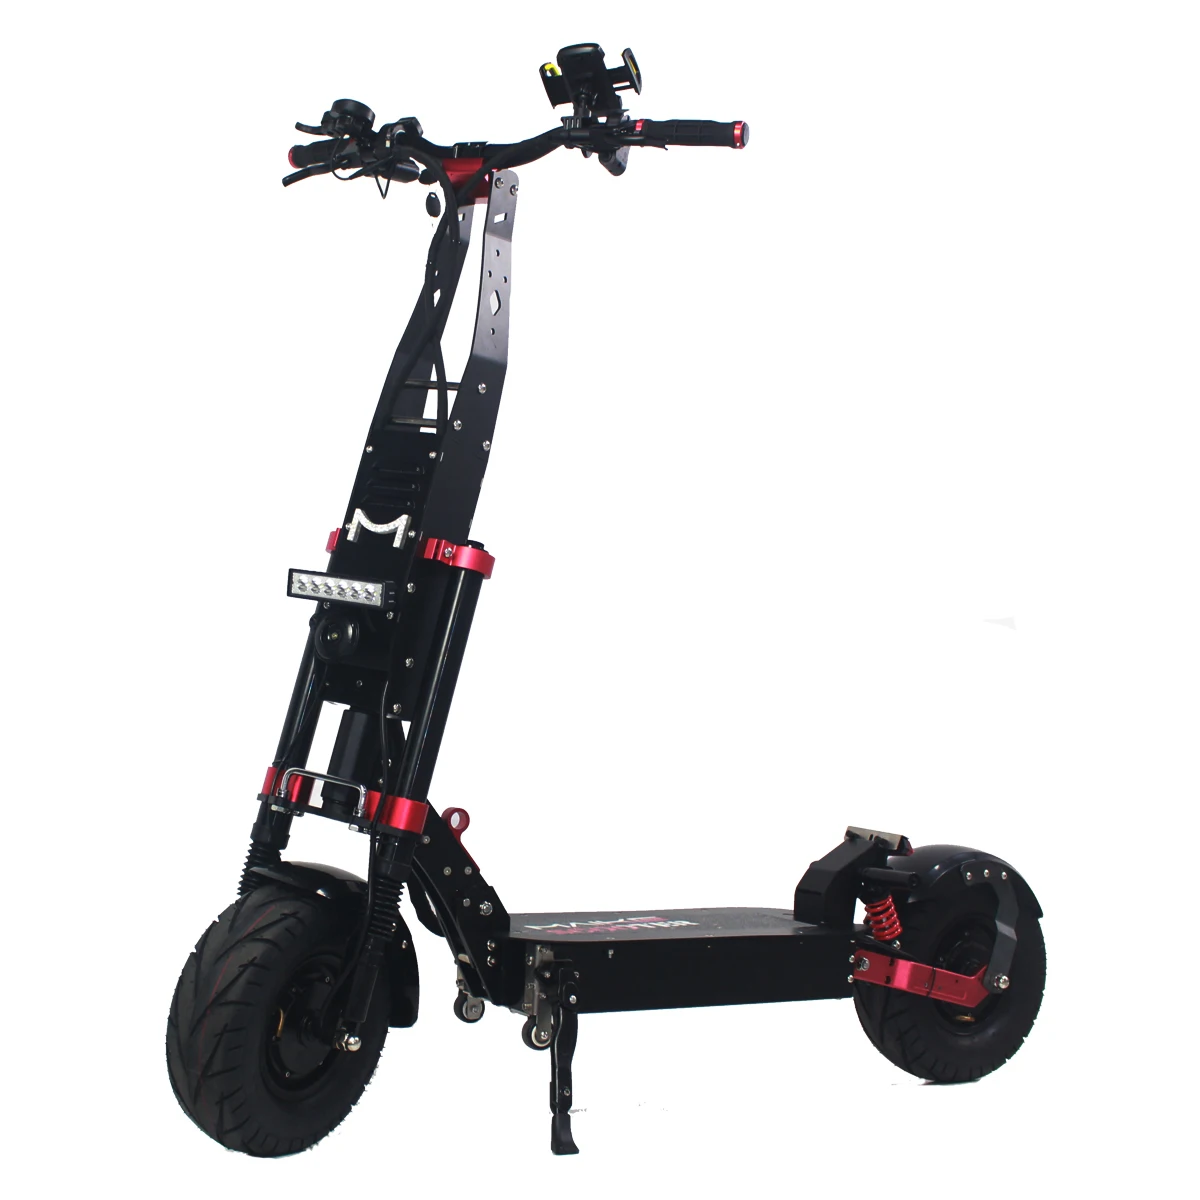 

Maike wholesale 7200W MK9x 13 inch fat tire monopattino elettrico doble motor dualtron scoot electr adult electric scooters